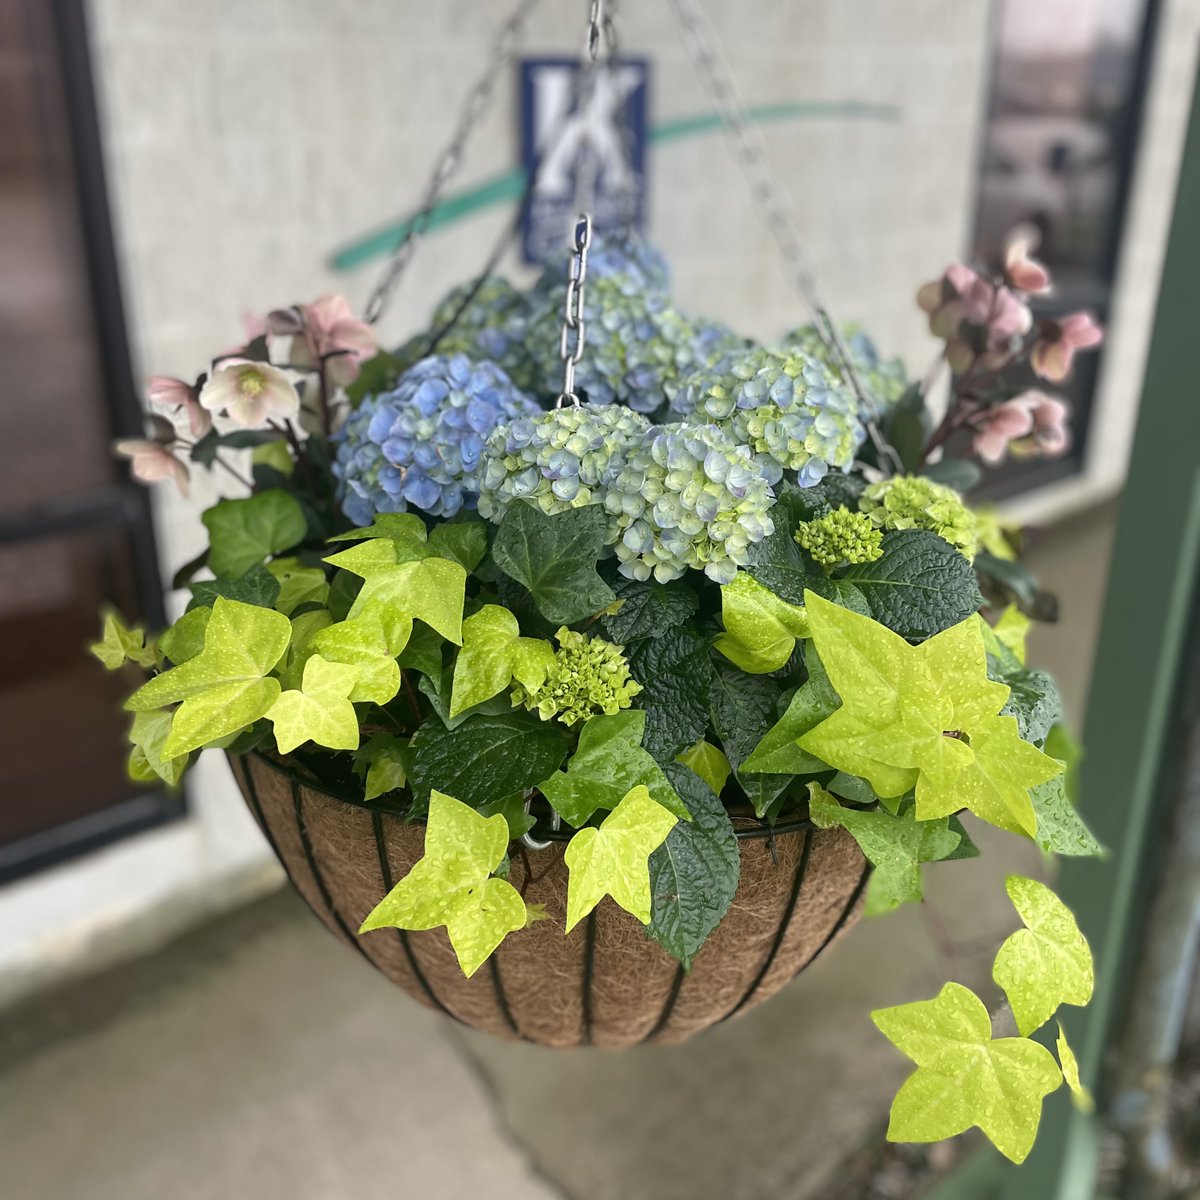 Our hanging baskets look super! Yours could too.